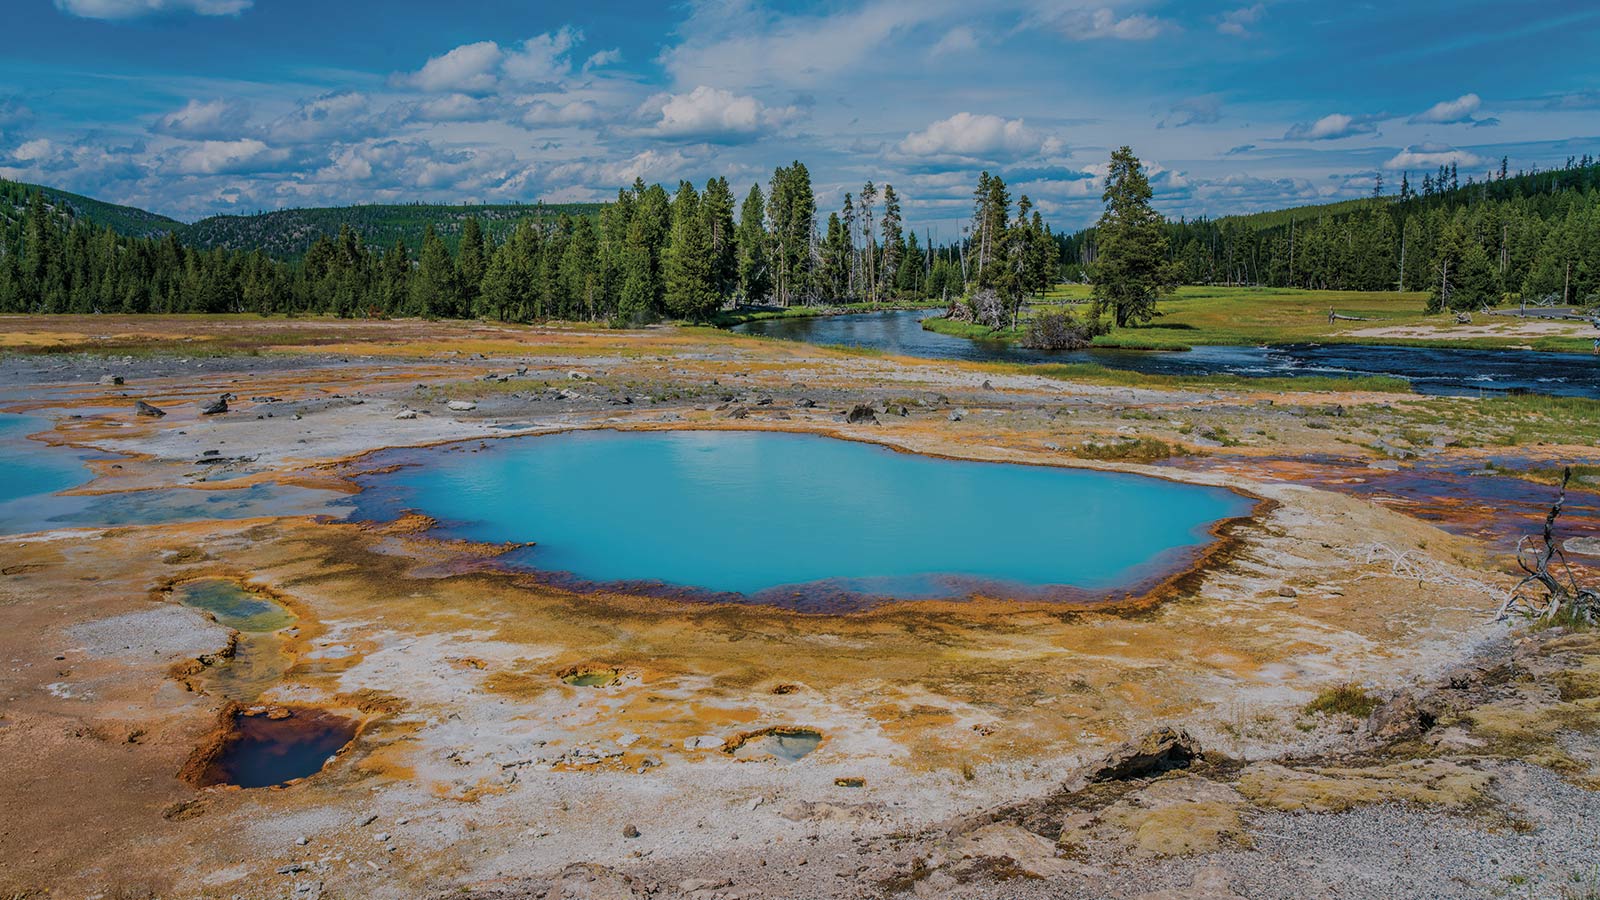 The colorful hot spring pools in Yellowstone National Park, Wyom